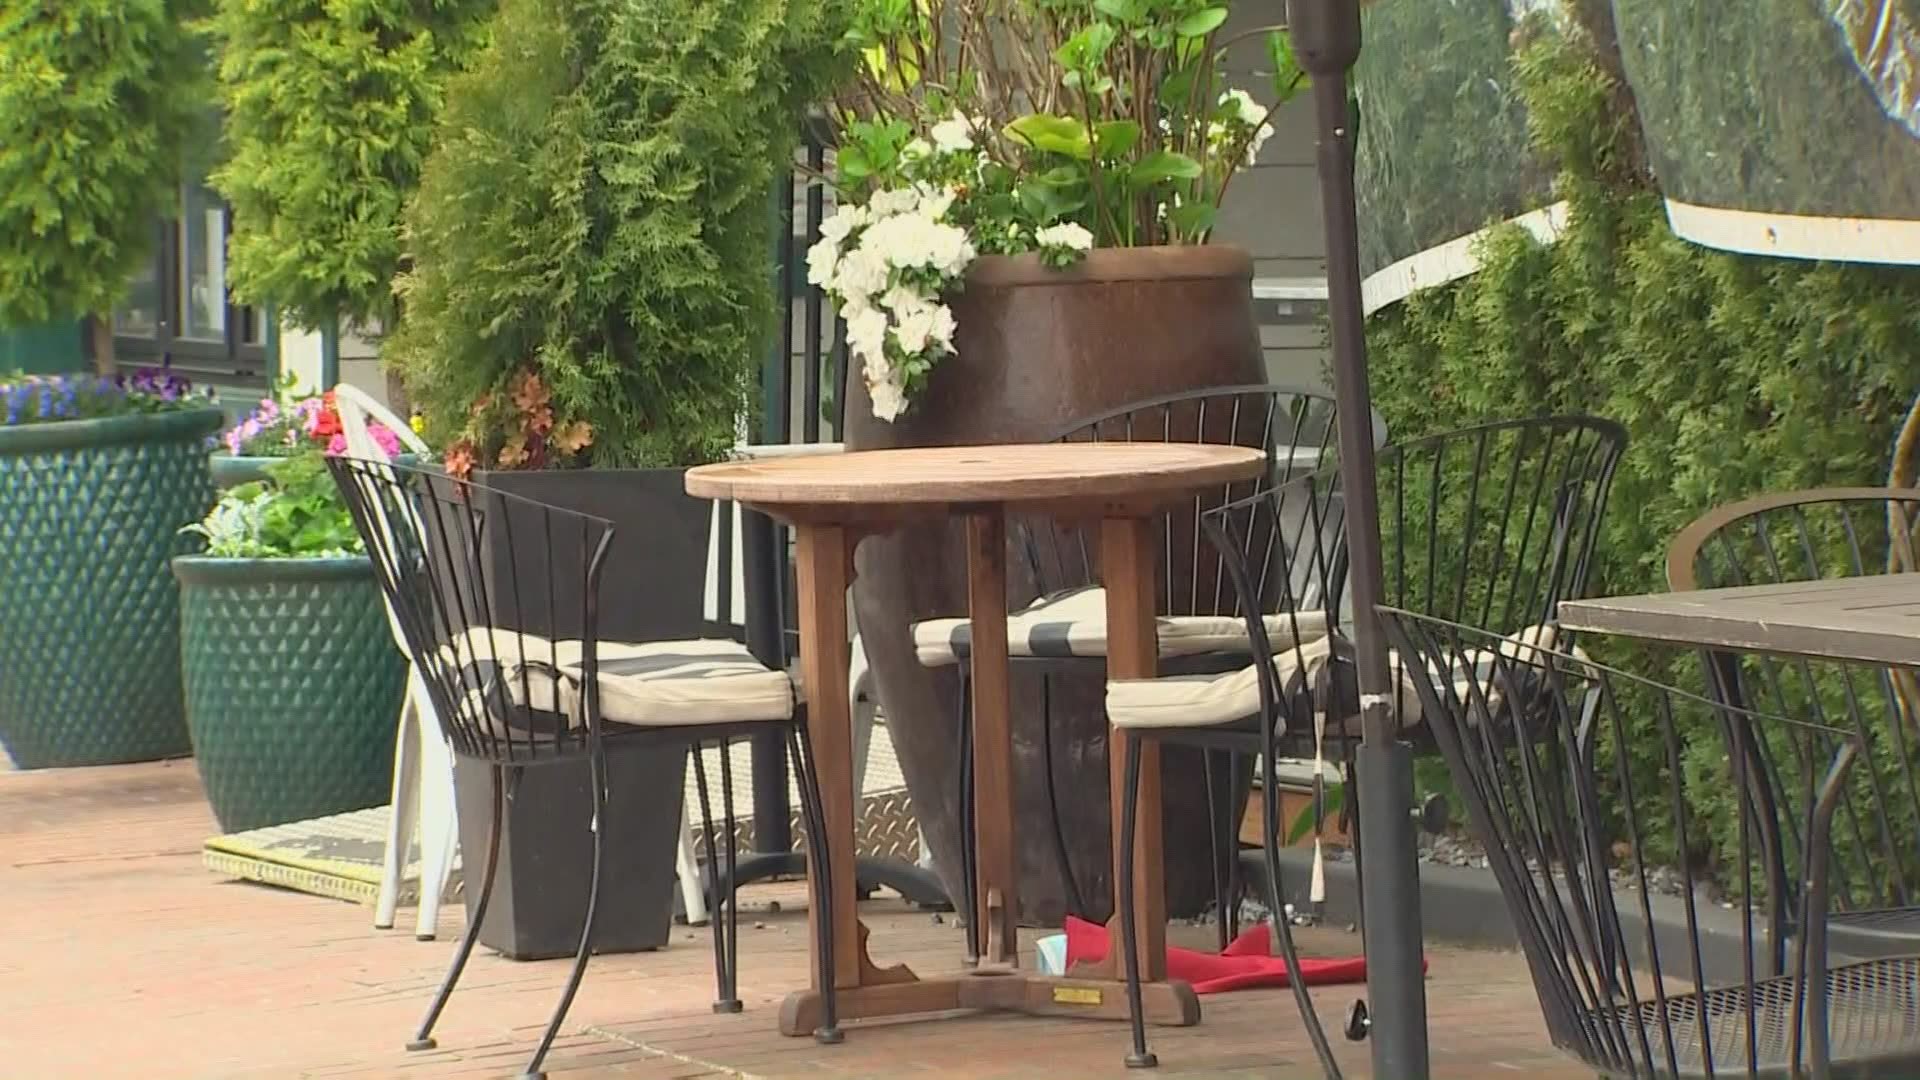 The City of Bellevue hopes to help its restaurants expand outdoor dining spaces as summer nears.